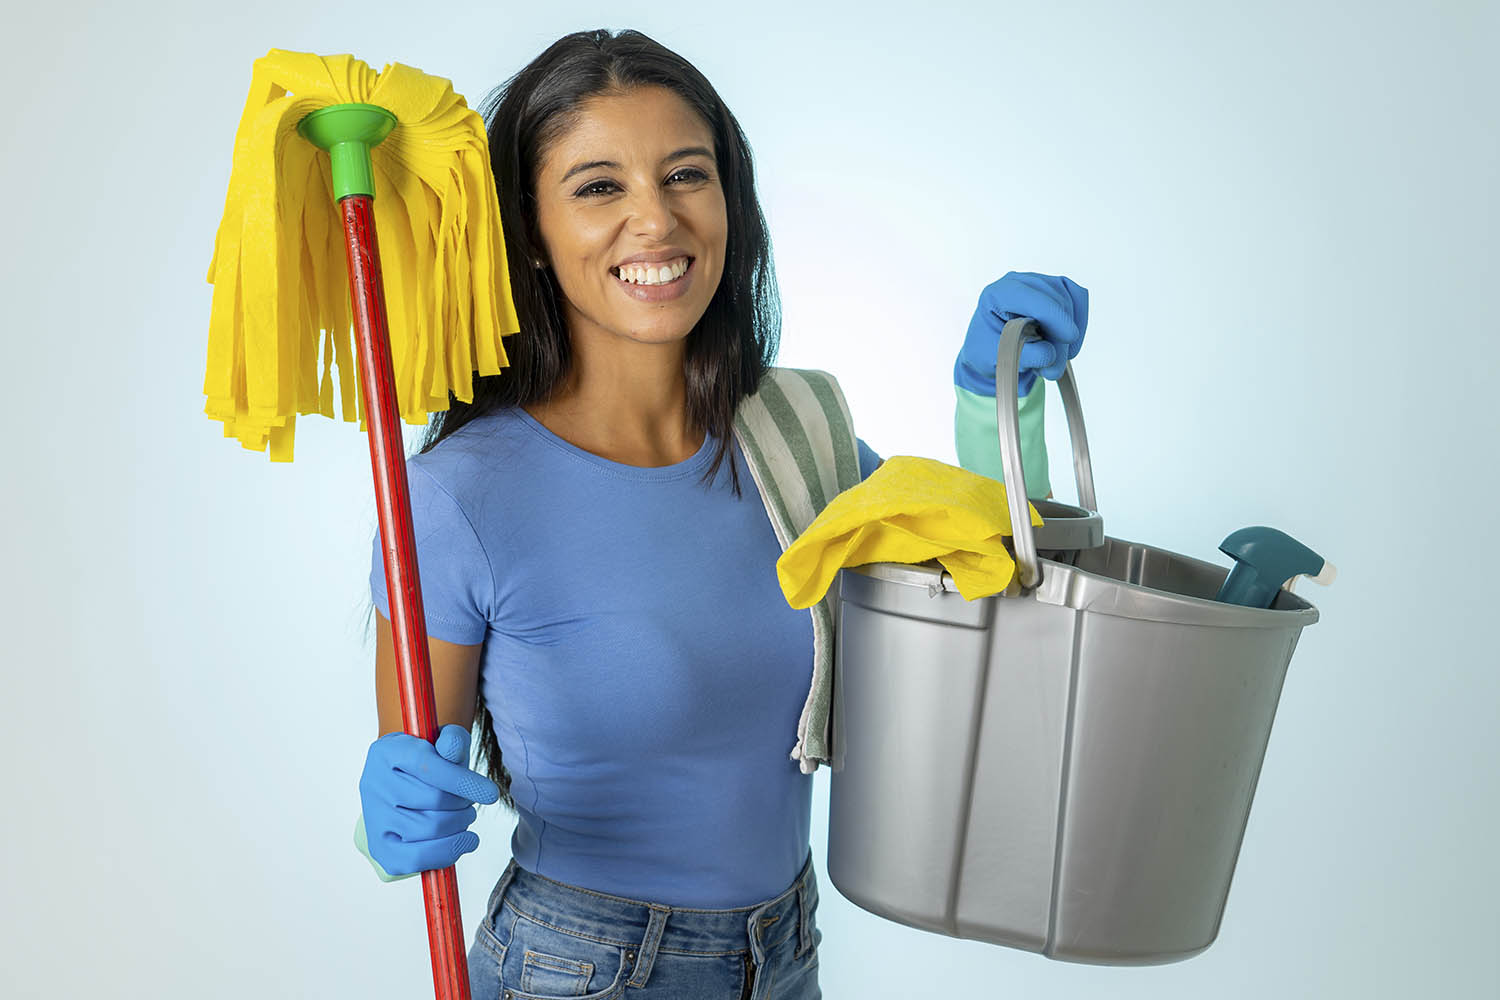 Five things you need to know before hiring a cleaner